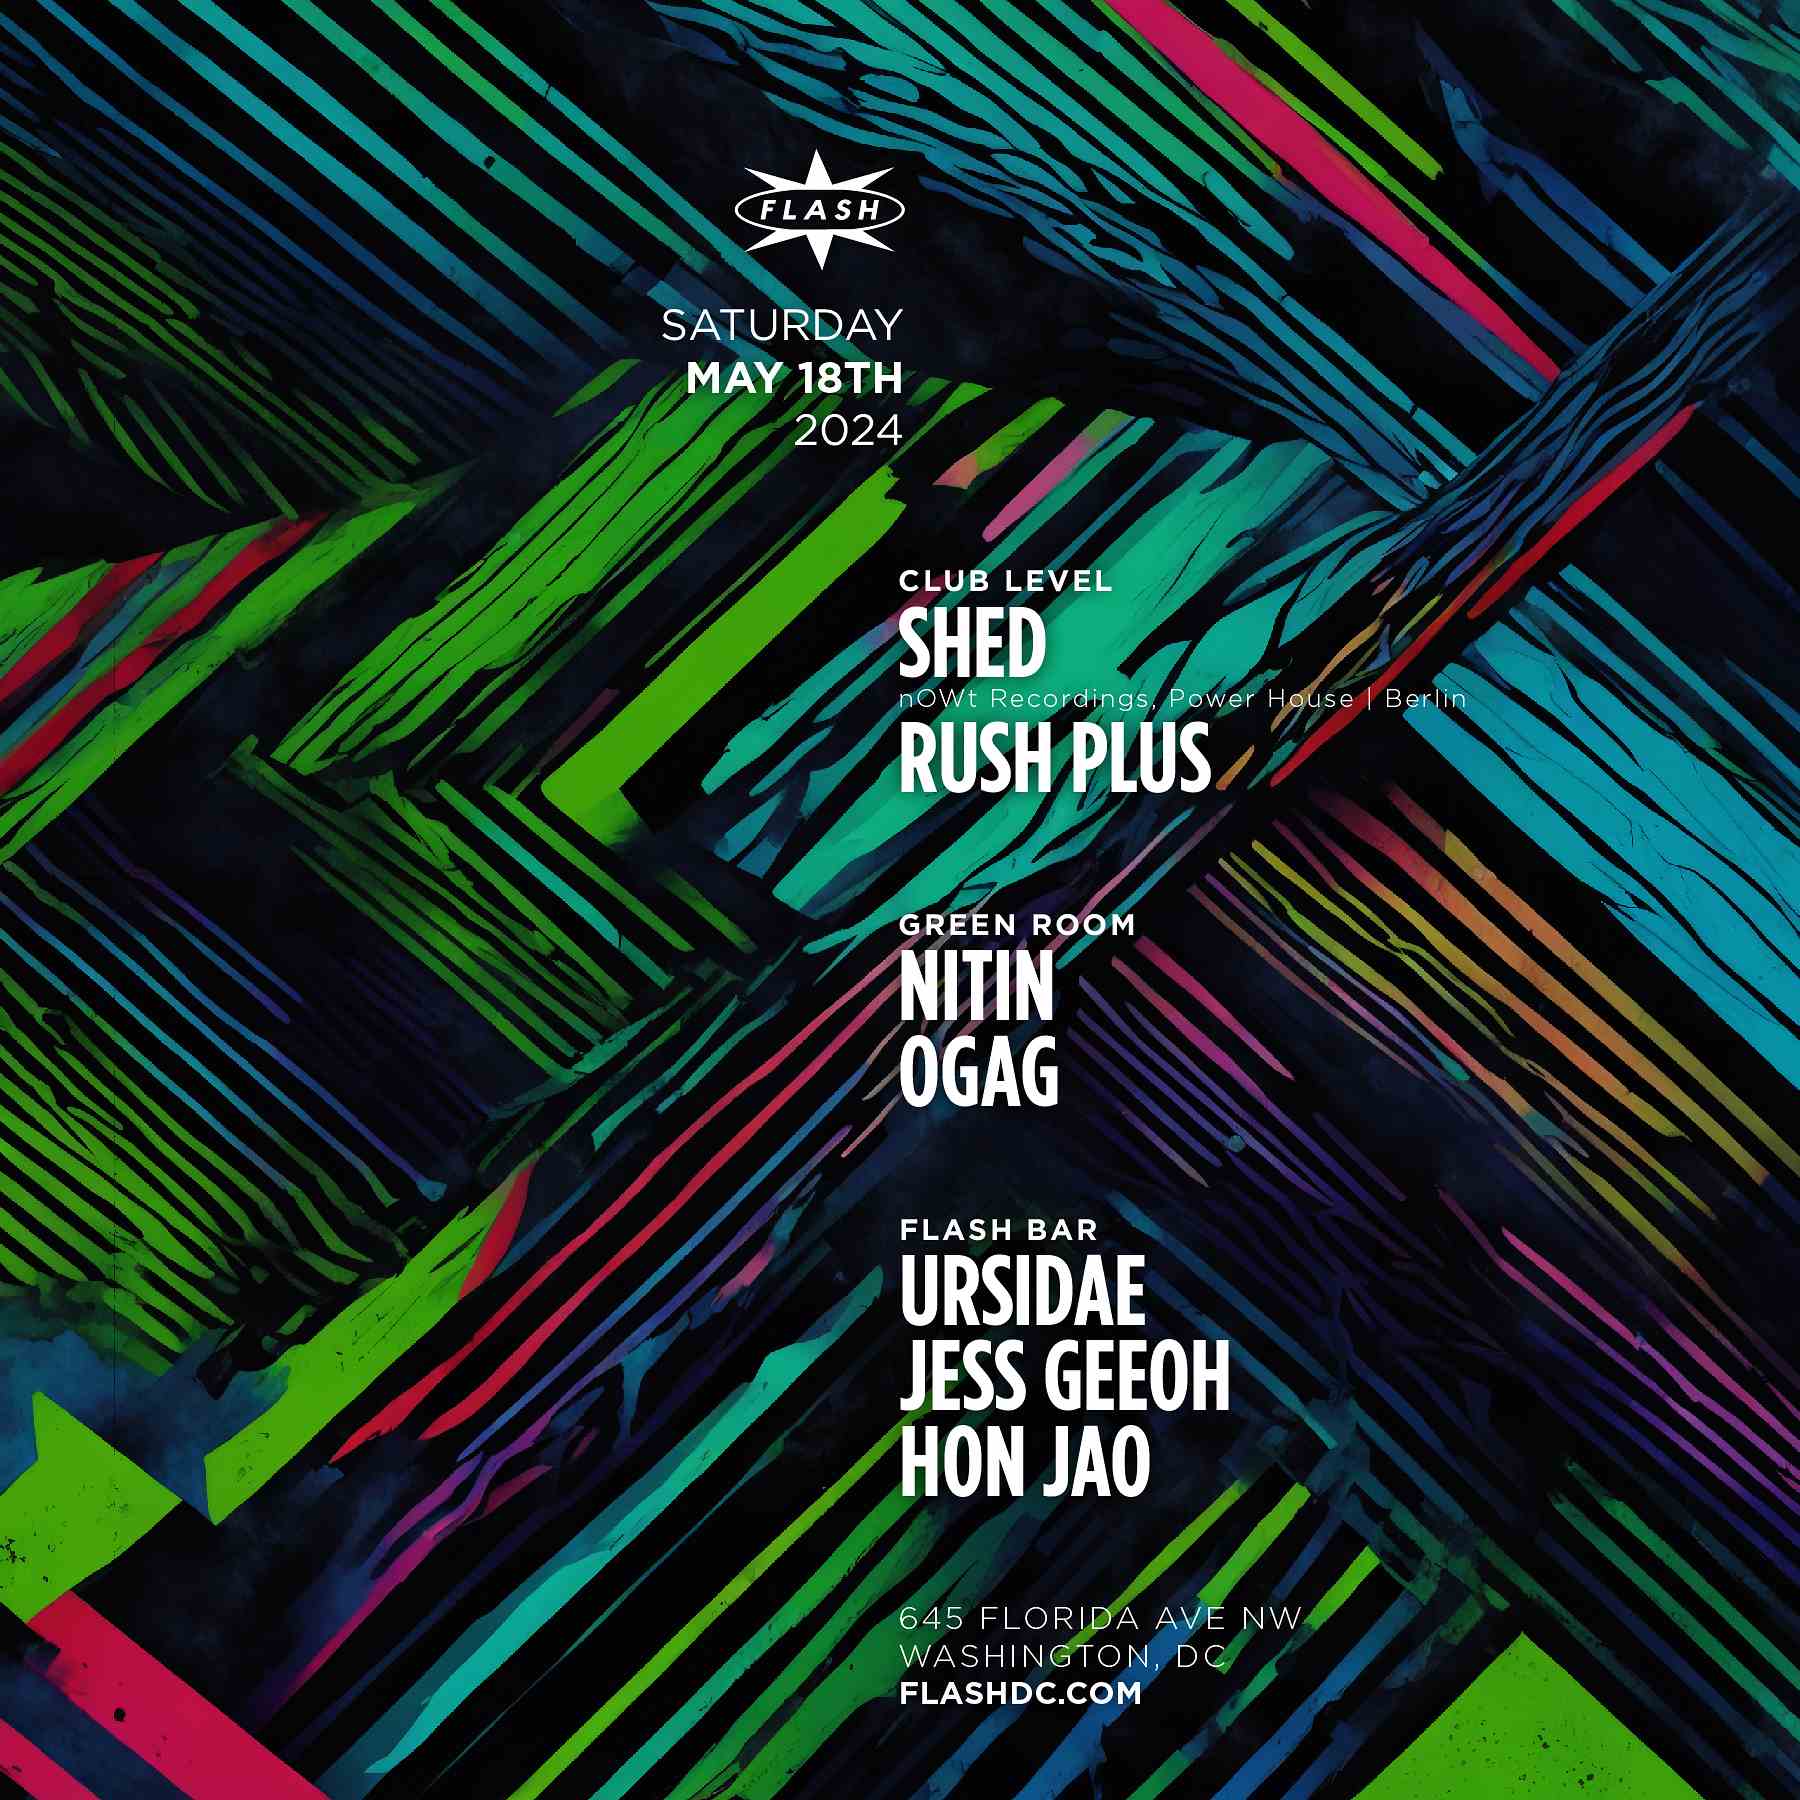 Shed event flyer